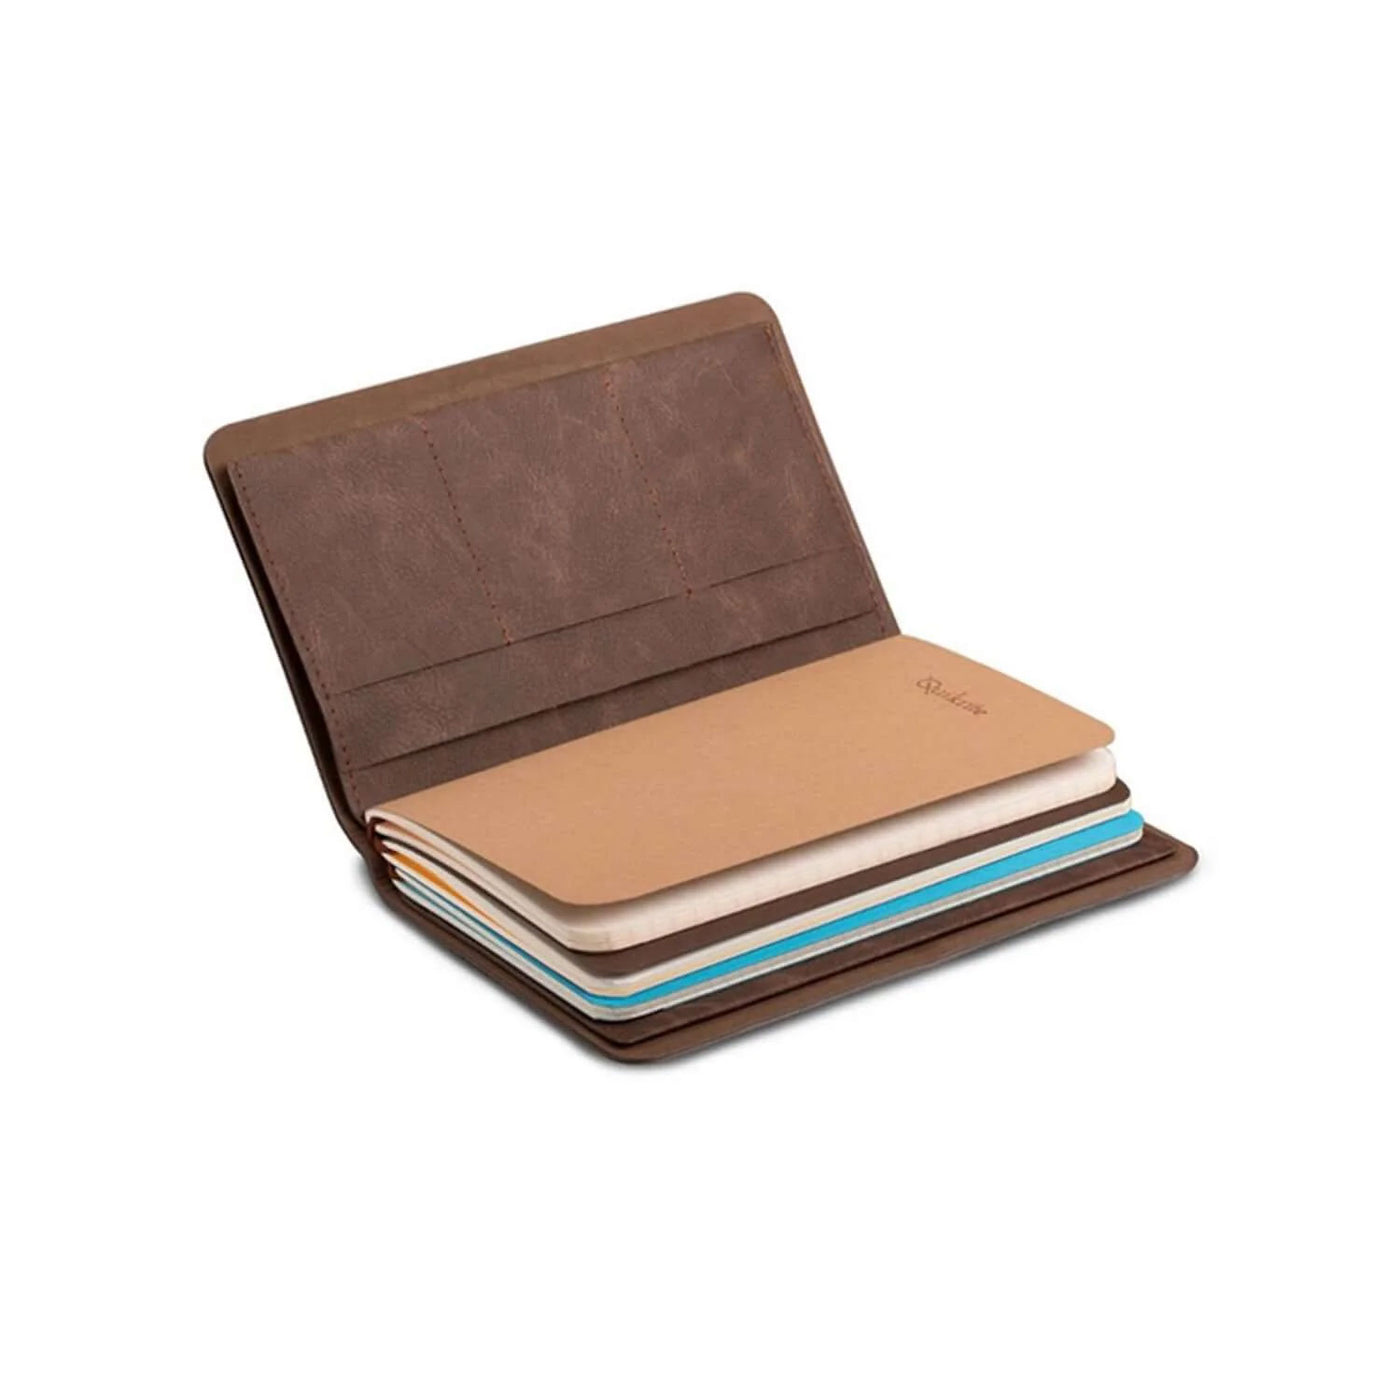 Pennline Quikrite Pebl Journal, Rustic Brown (Plain, Ruled, Square Ruled, Dot Ruled) - A5 3